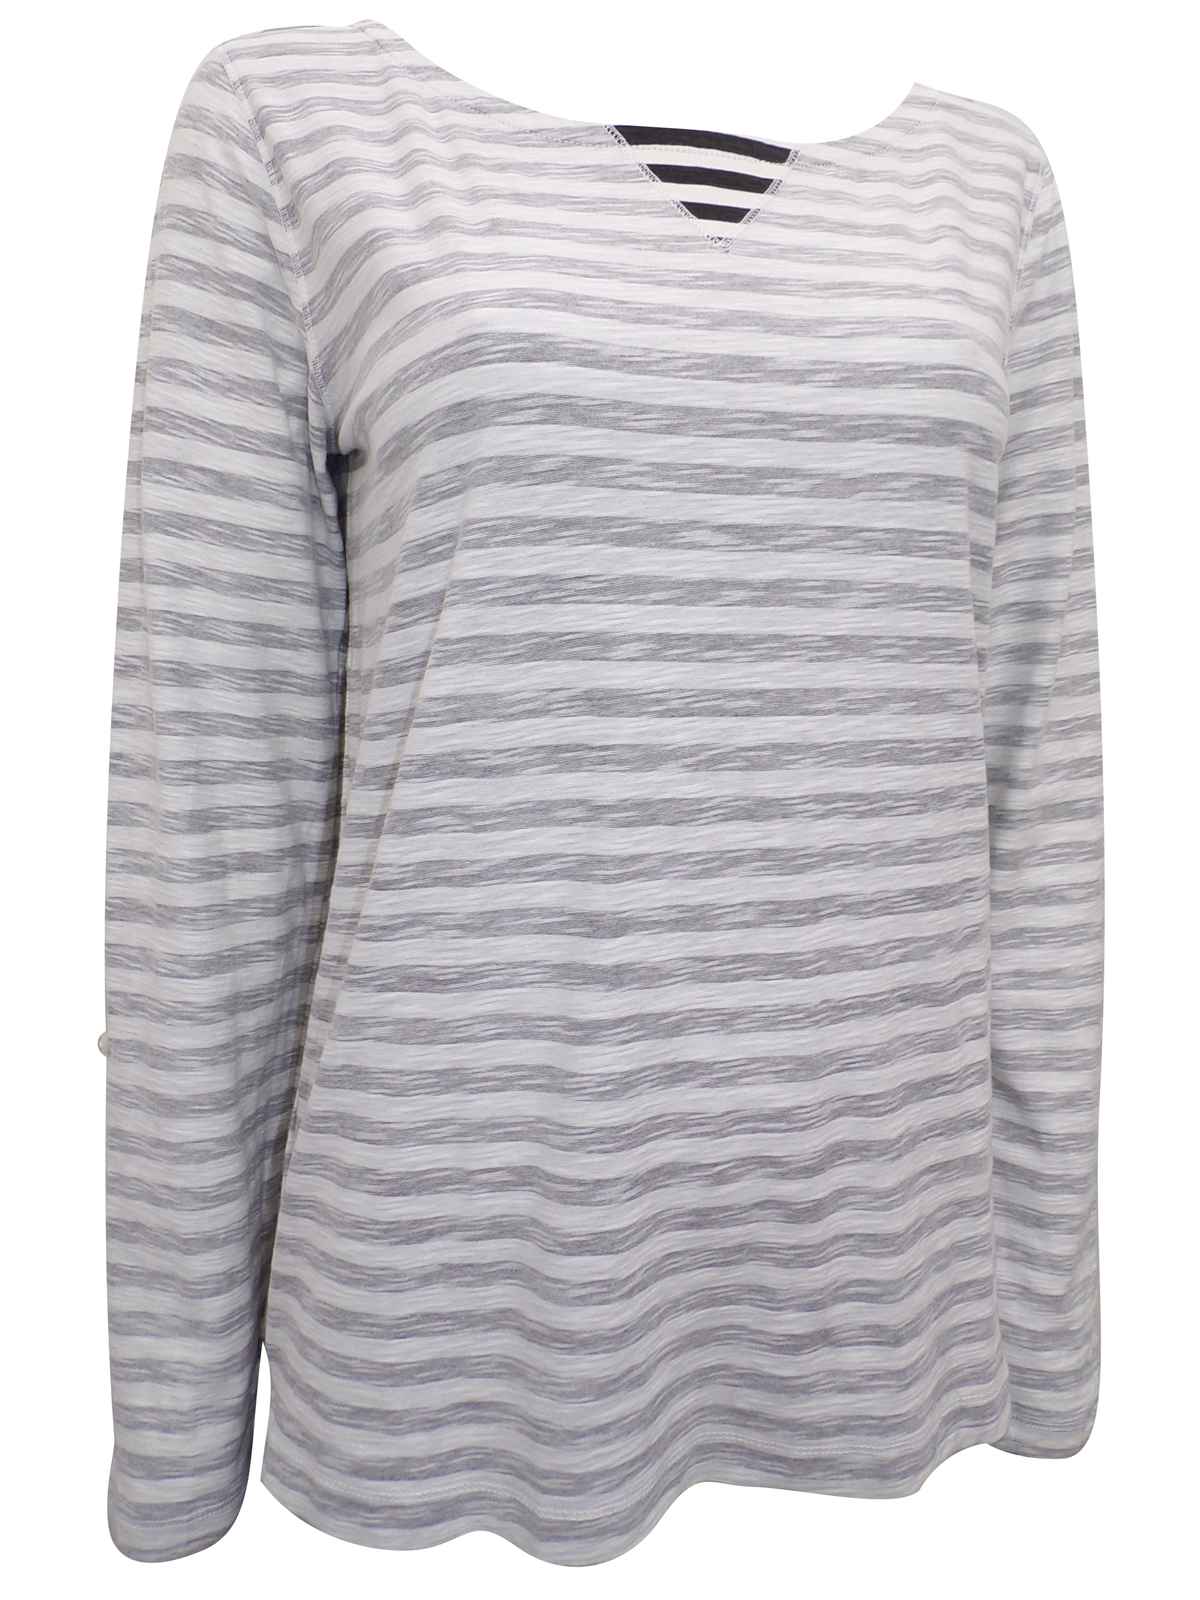 Comma - - Comma WHITE Pure Cotton Striped Long Sleeve Top - Size 8 to 20